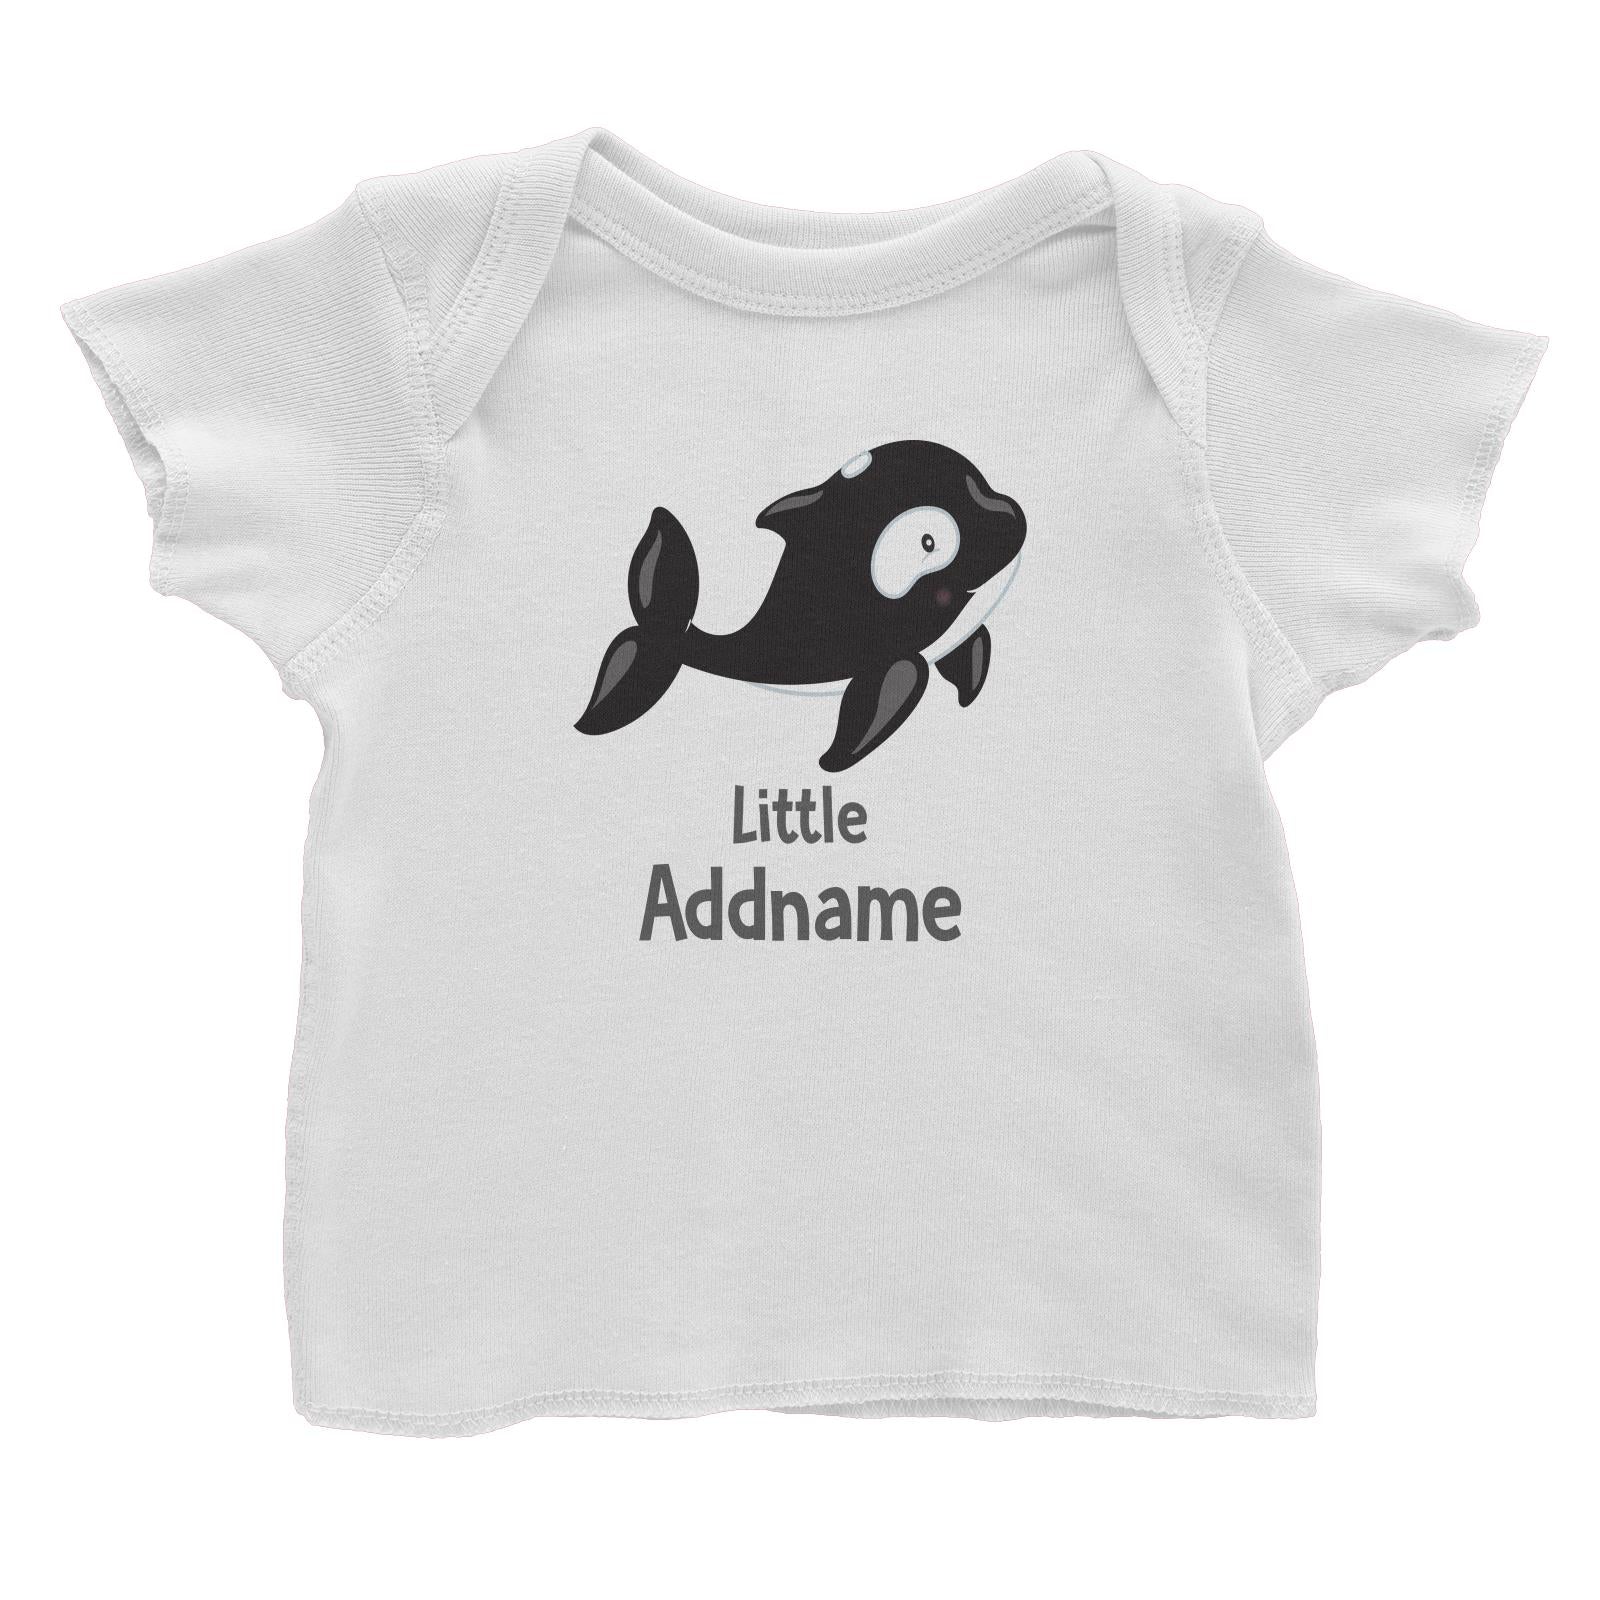 Arctic Animals Little Killer Whale Addname Baby T-Shirt